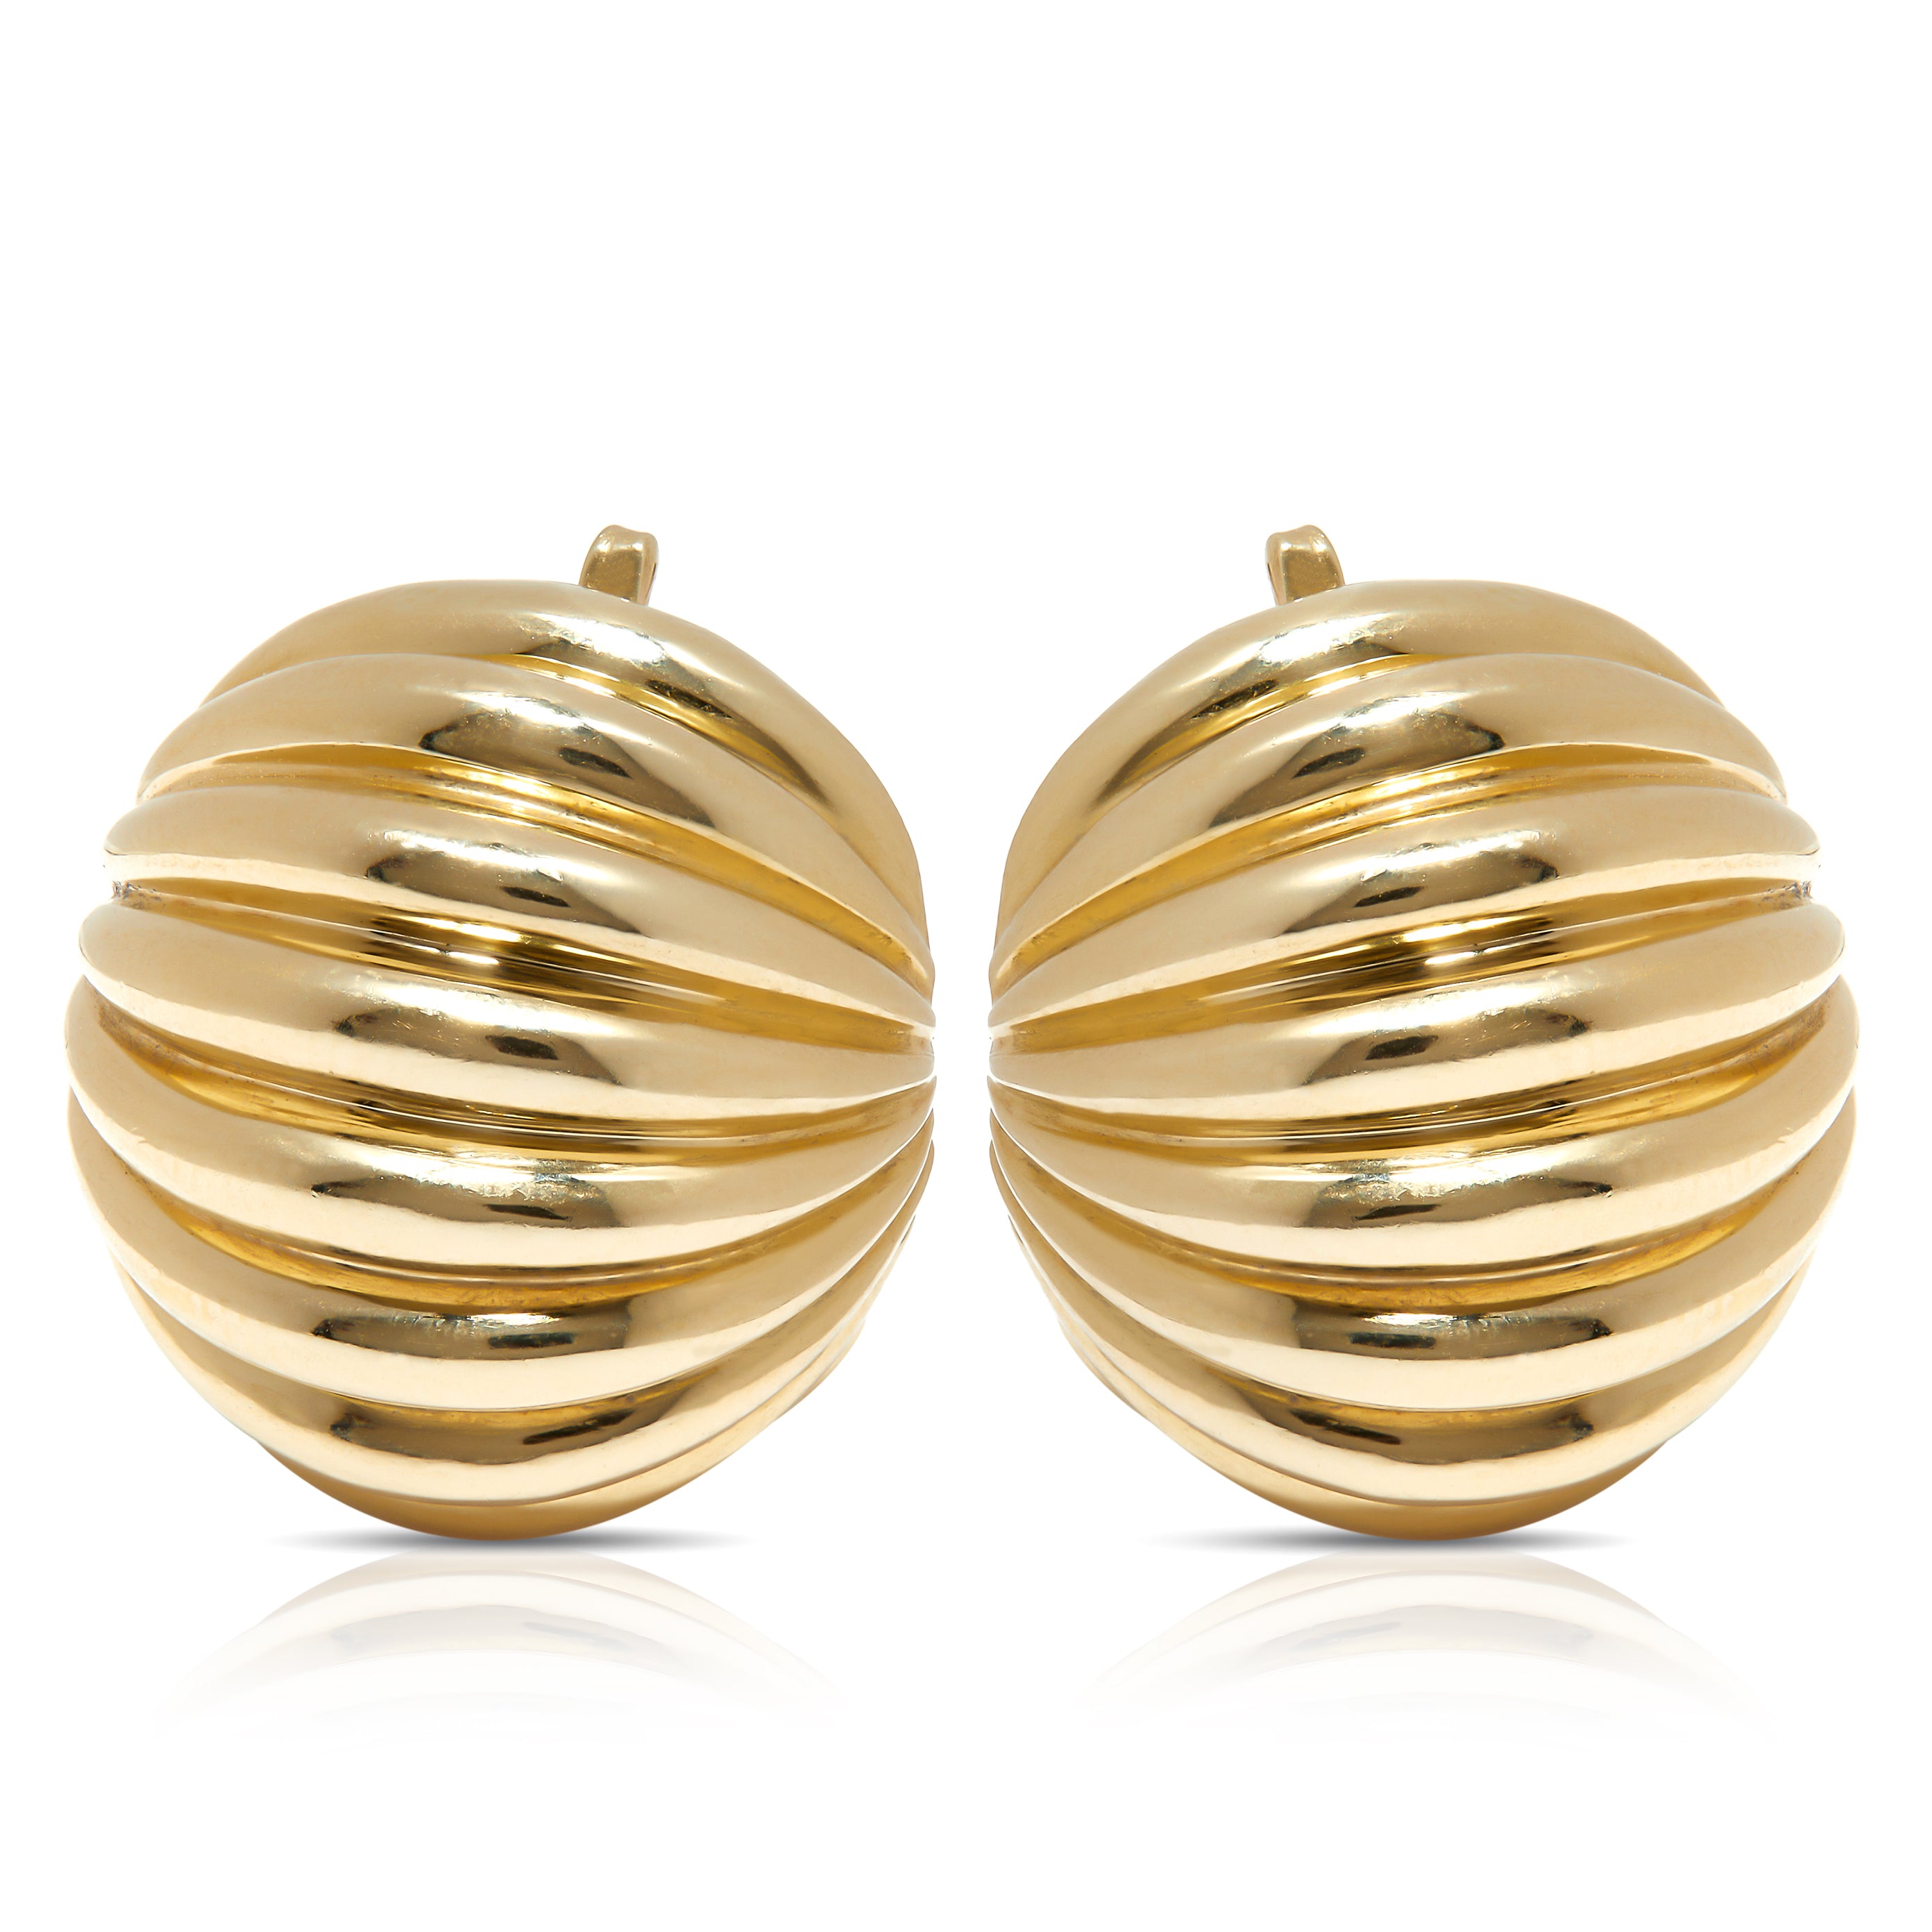 Gold clip earrings in fluted dome design.